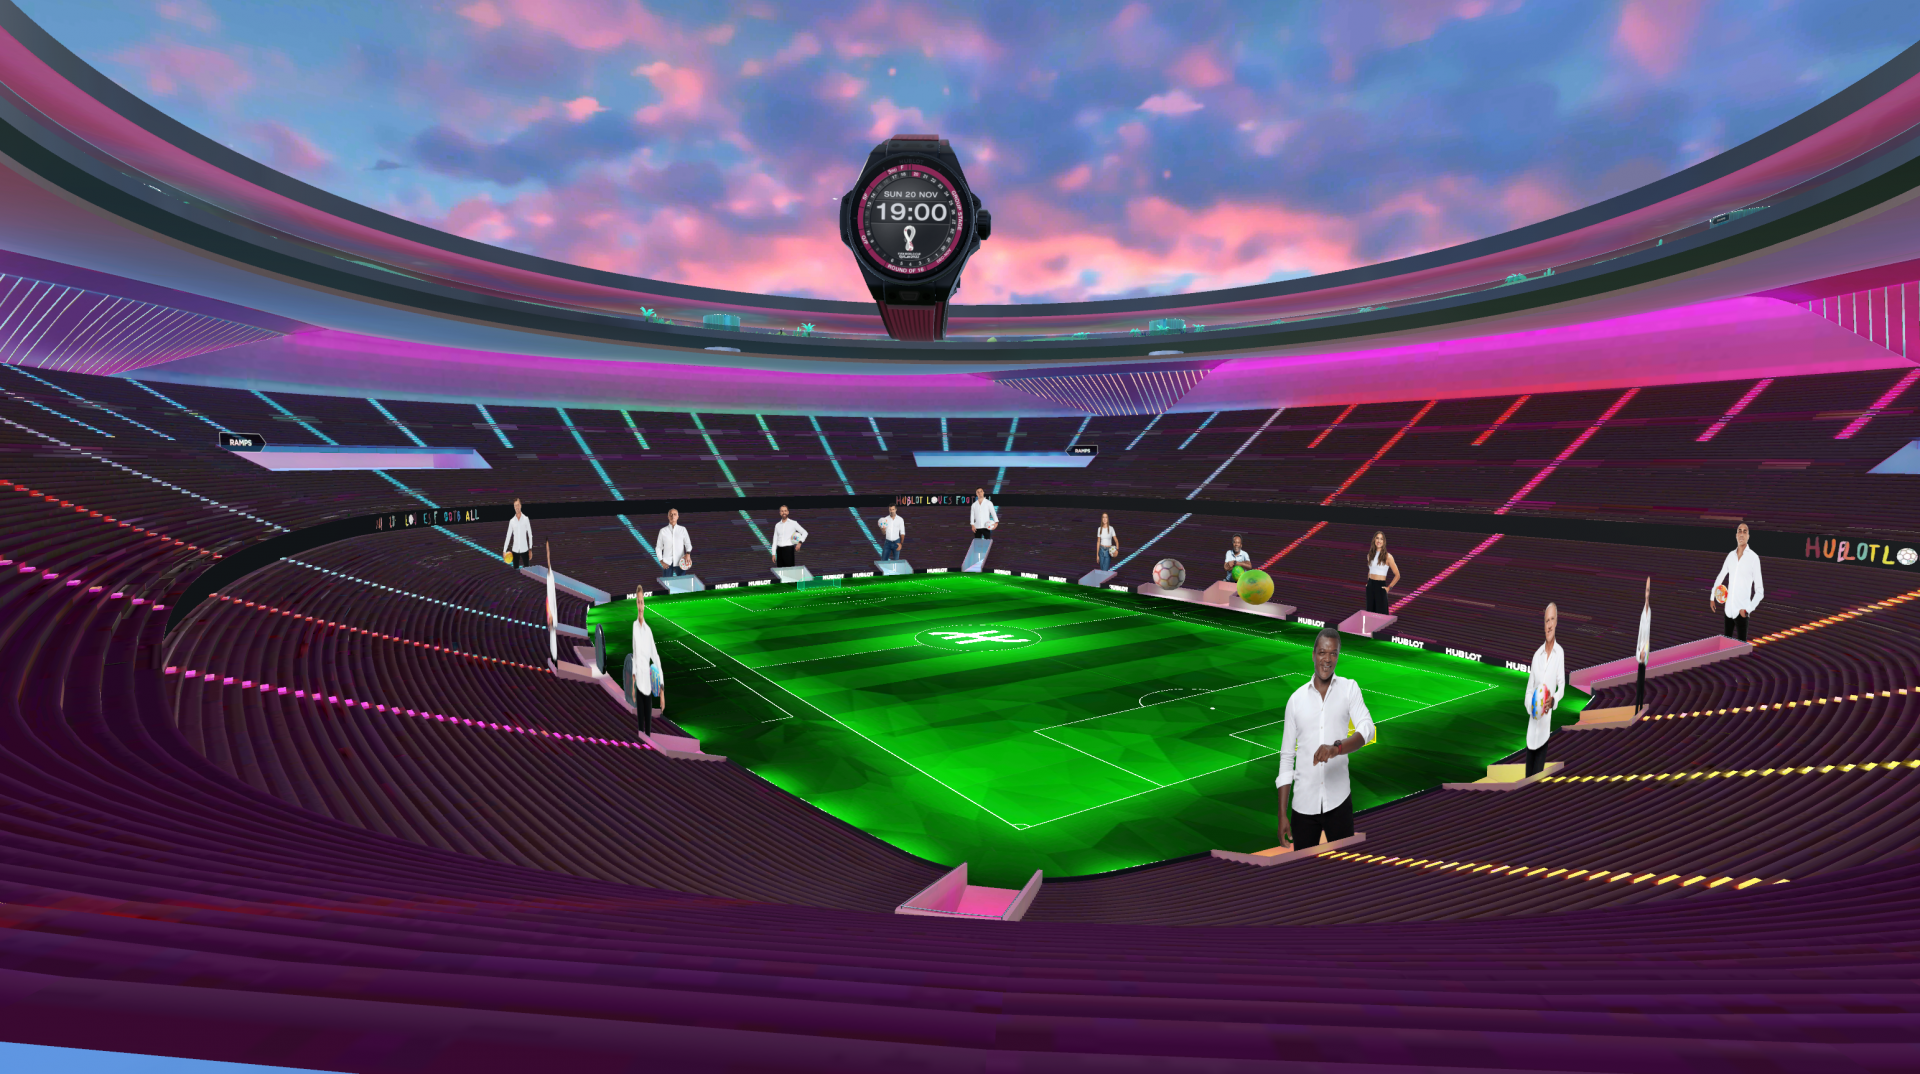 The hublot loves football metaverse stadium seen from above with the big bang e fifa world cup qatar tm 2